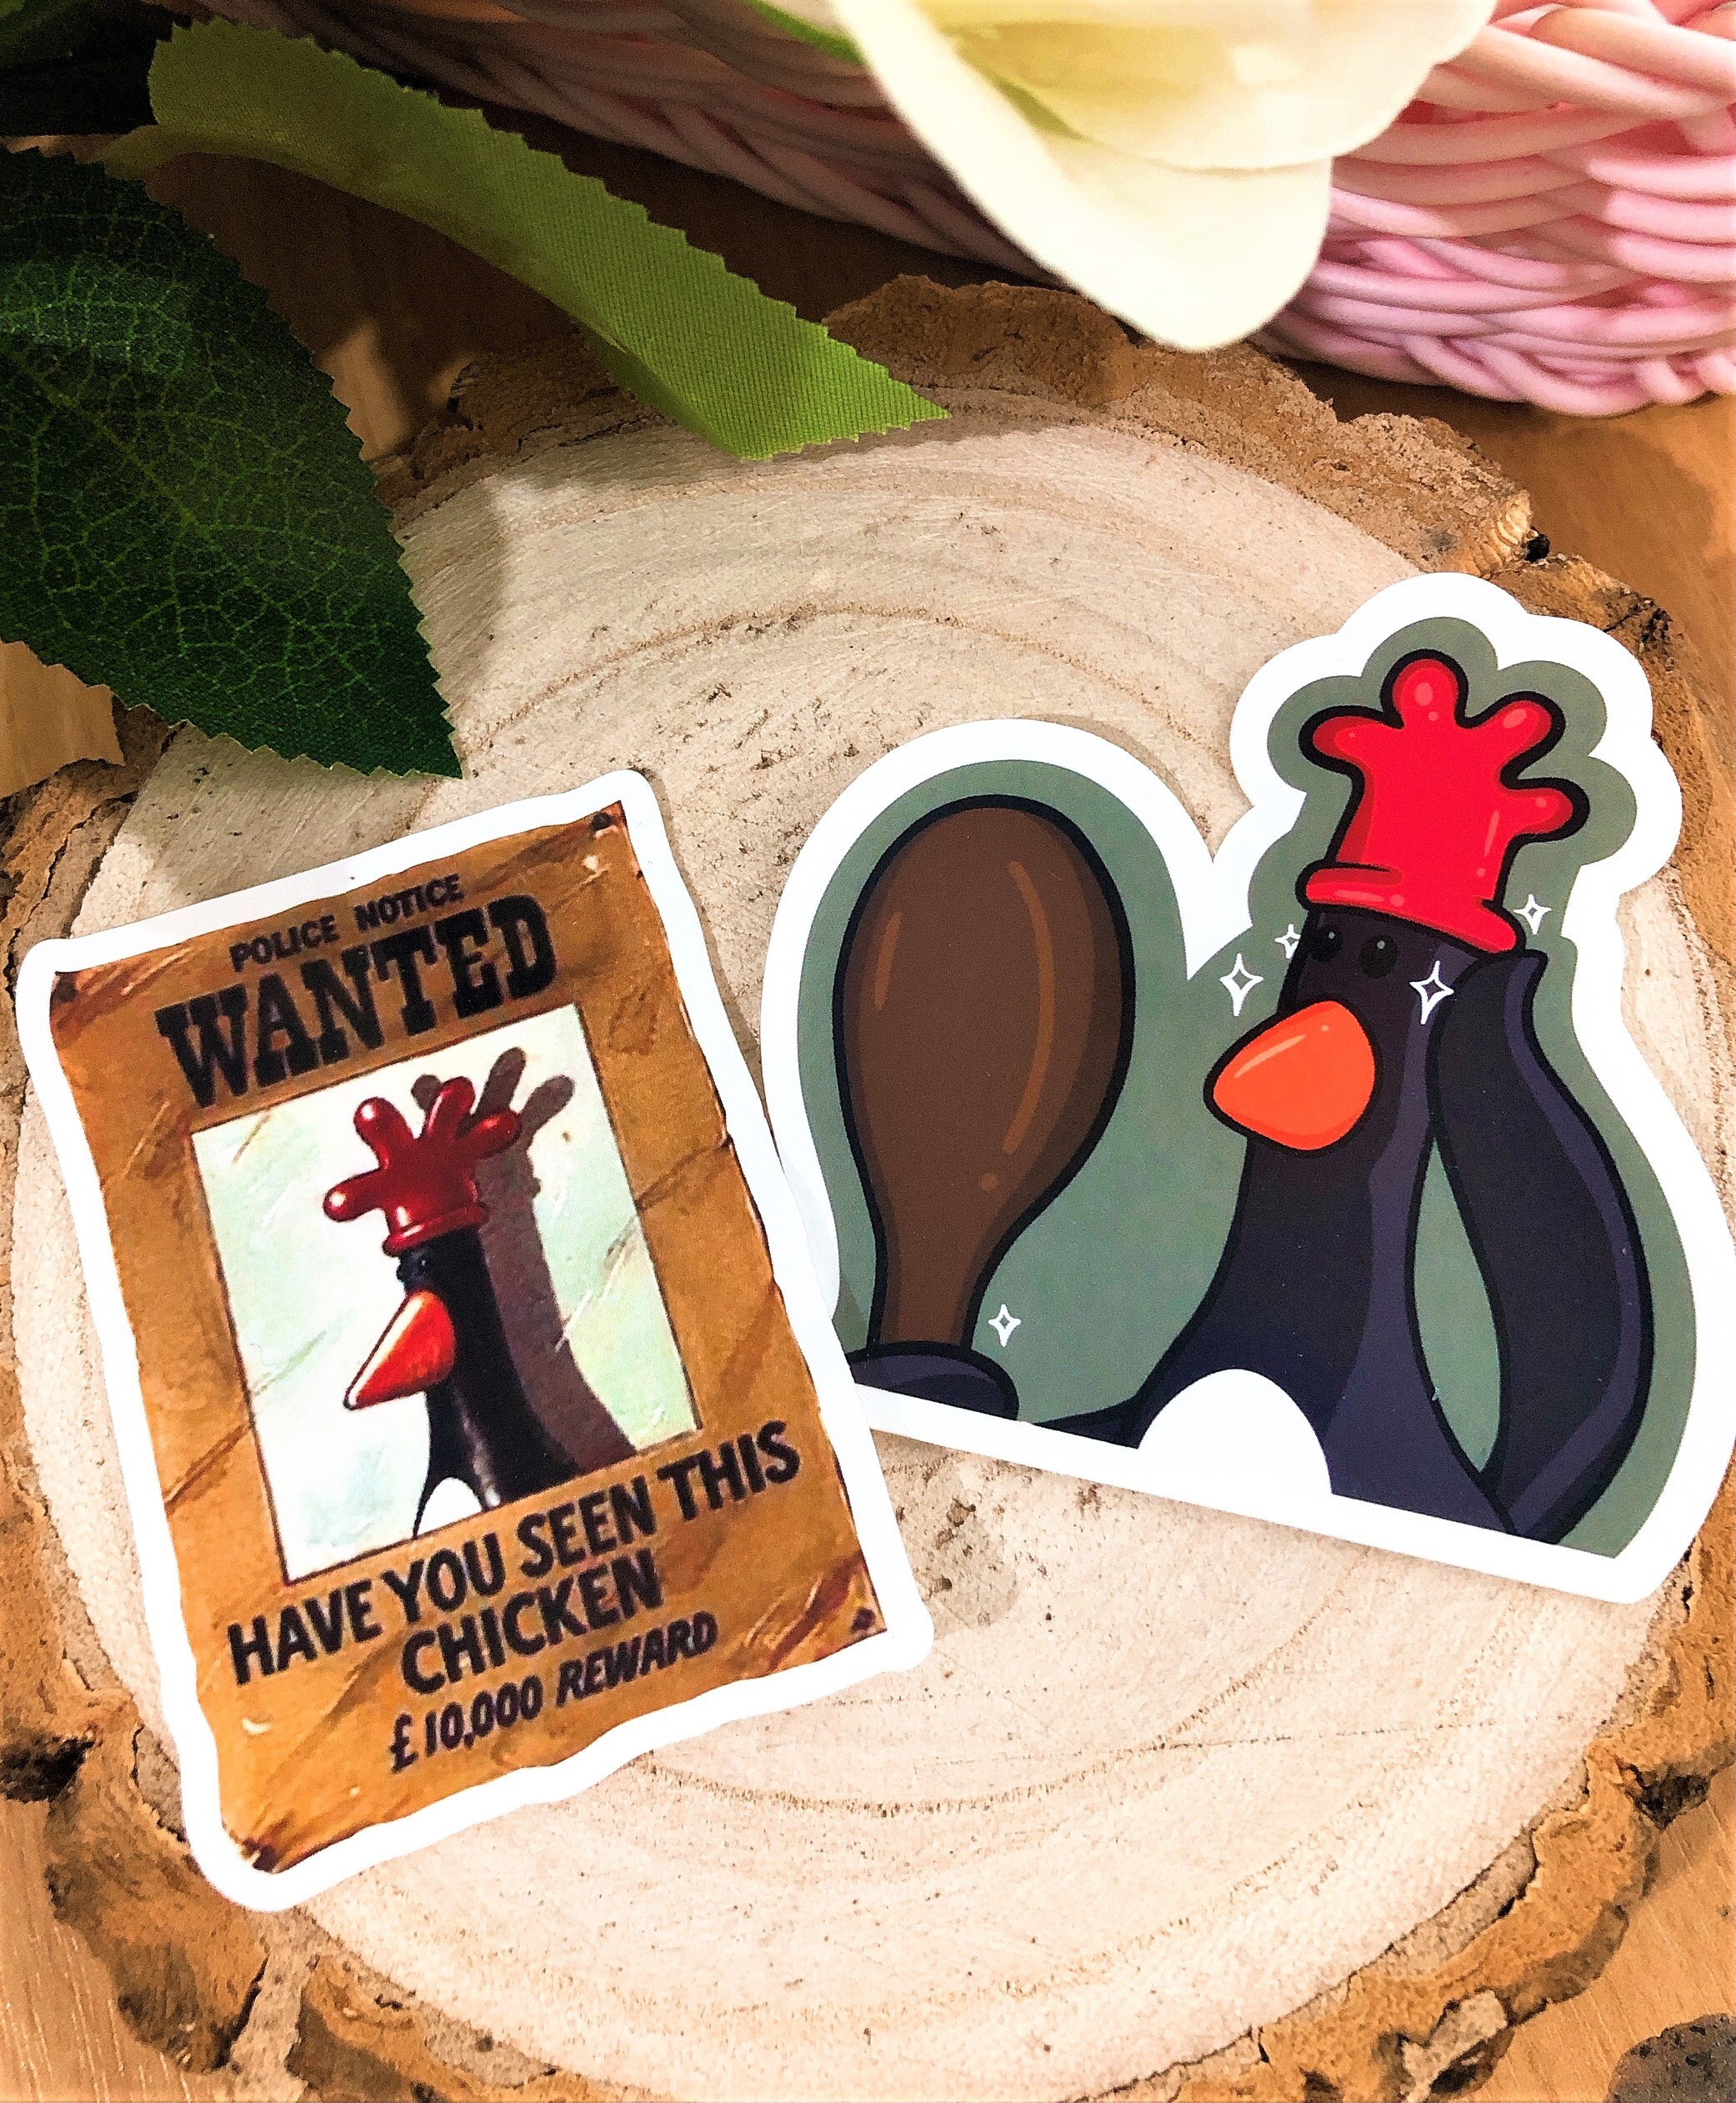 Feathers Mcgraw Mirror Art Funny - Feathers Mcgraw - Sticker